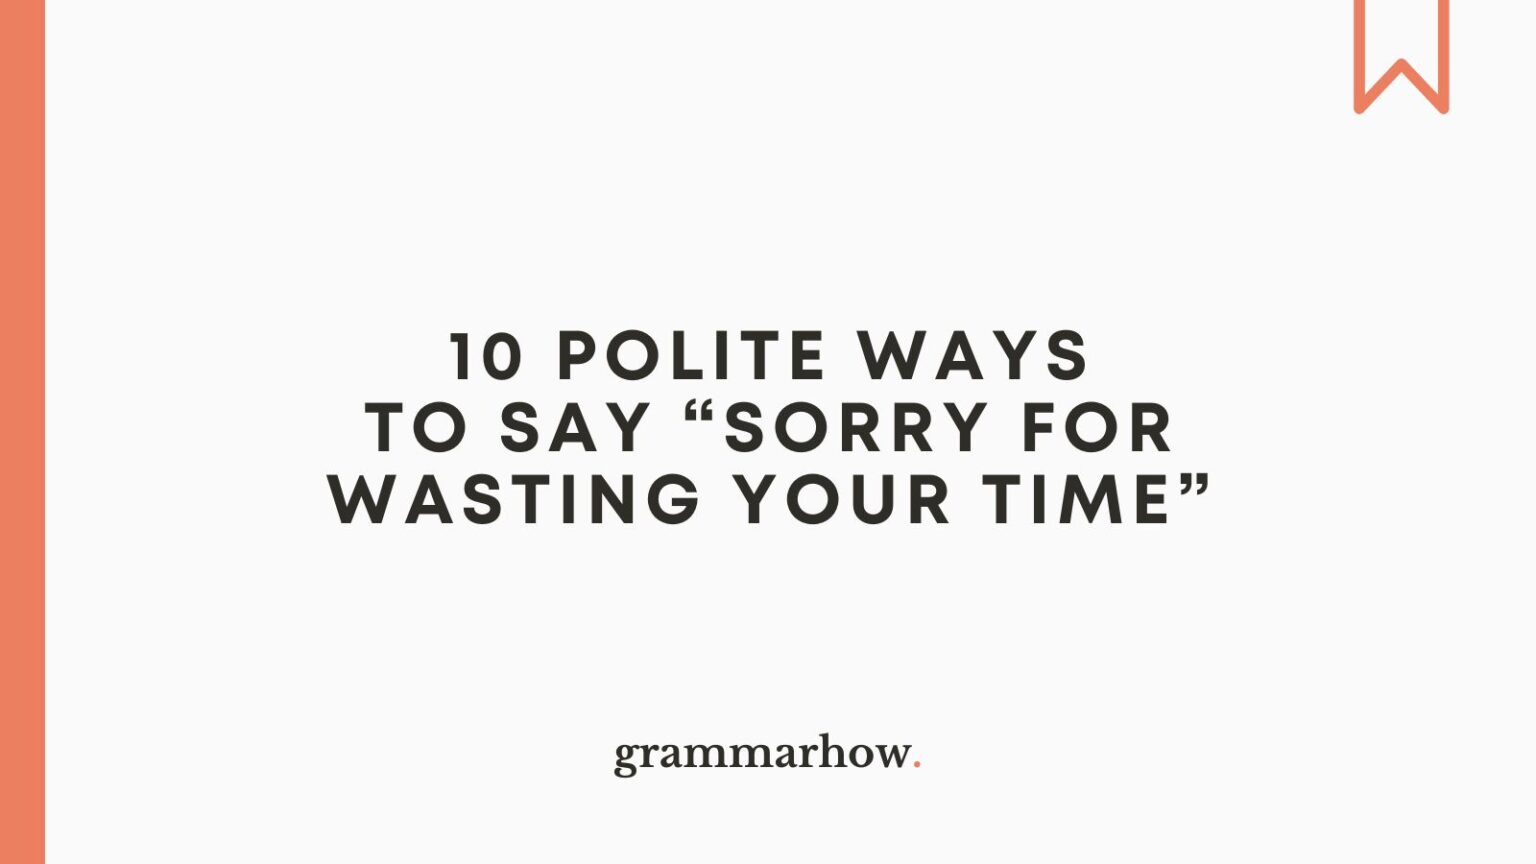 10-polite-ways-to-say-sorry-for-wasting-your-time